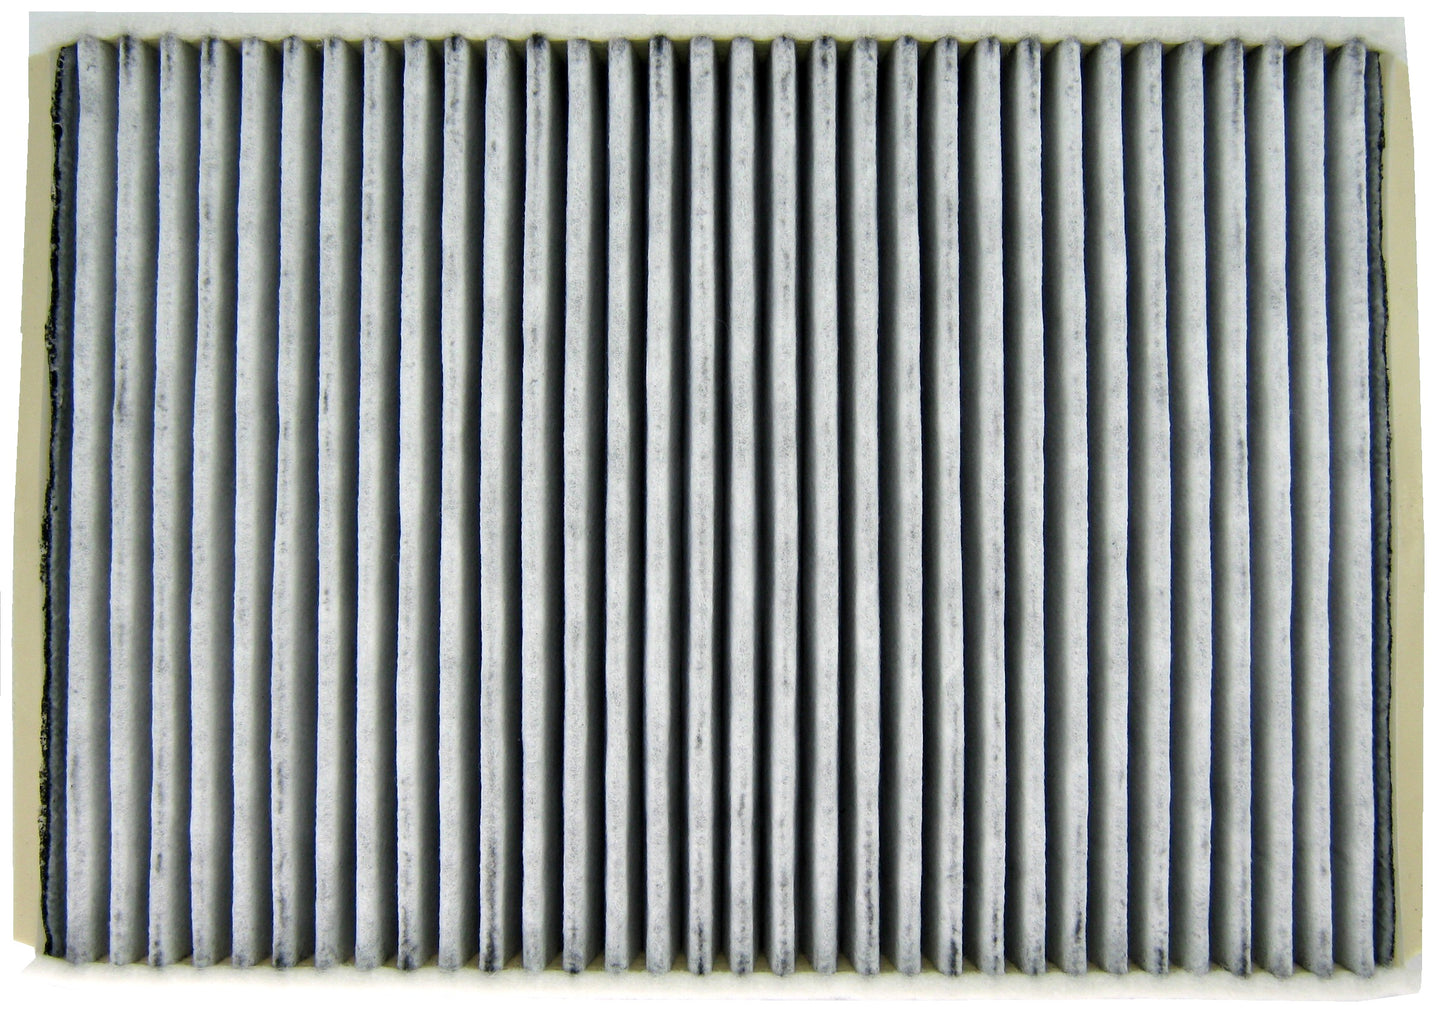 Replacement Cabin Pollen Filter for Land Rover Freelander 2 - Carbon Type - Aftermarket